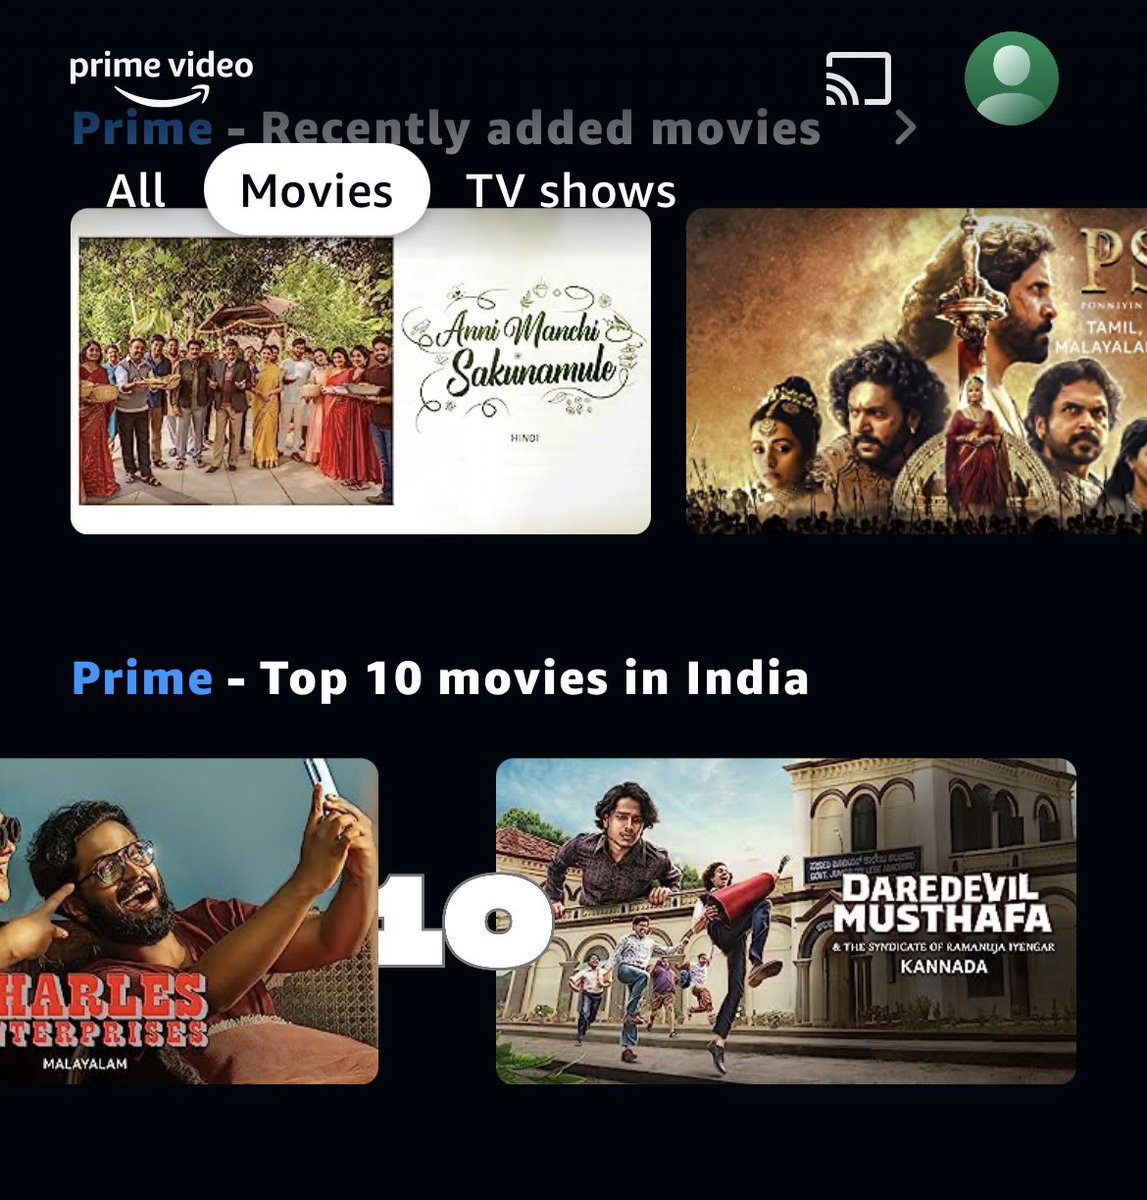 Ddm is in the list of top 10 movies in India on prime. 🥳

Can we bring it up to #1st position? 😬

#DdmOnPrime
#DaredevilMusthafa 
#BlockbusterDdm